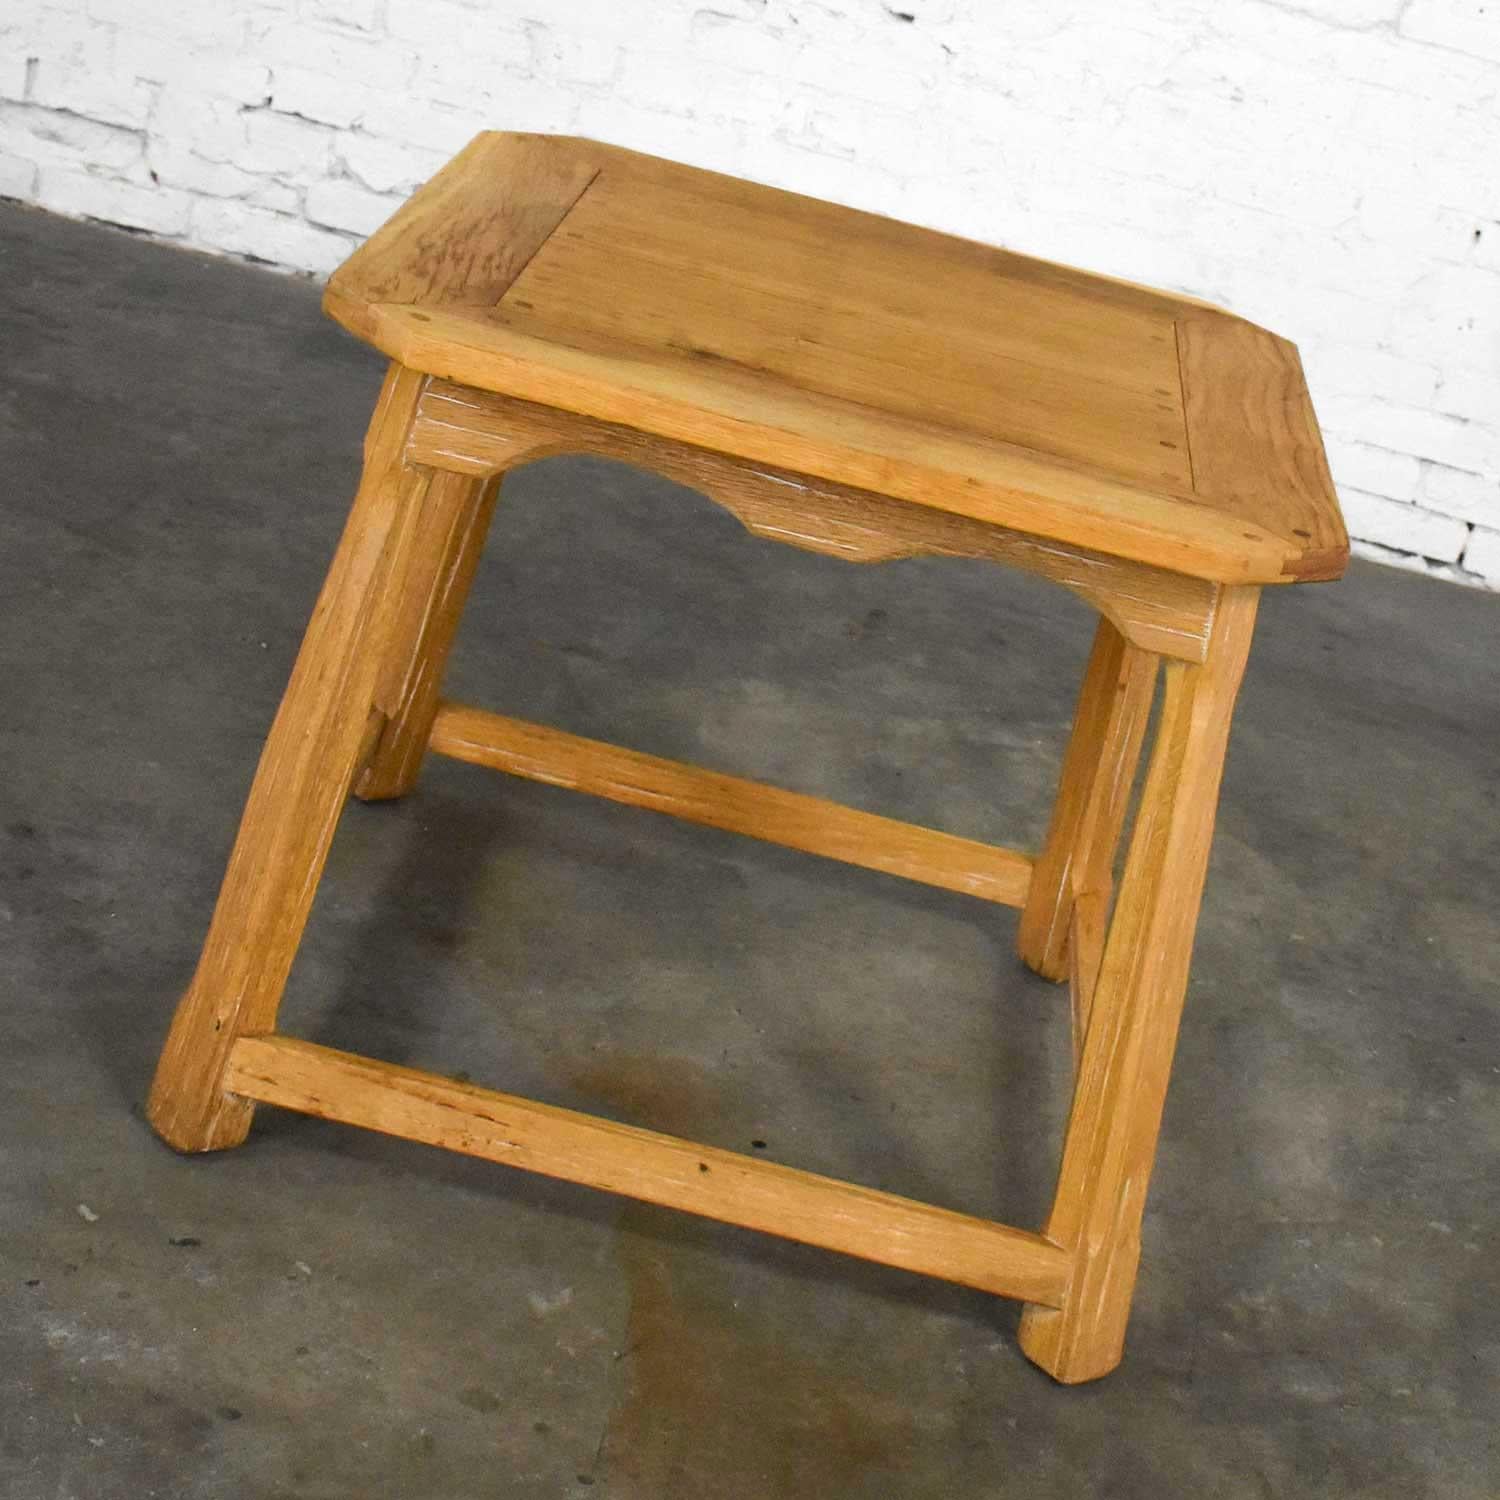 20th Century Larger Ranch Oak Lamp Table End Table Natural Oak Finish by A. Brandt Company